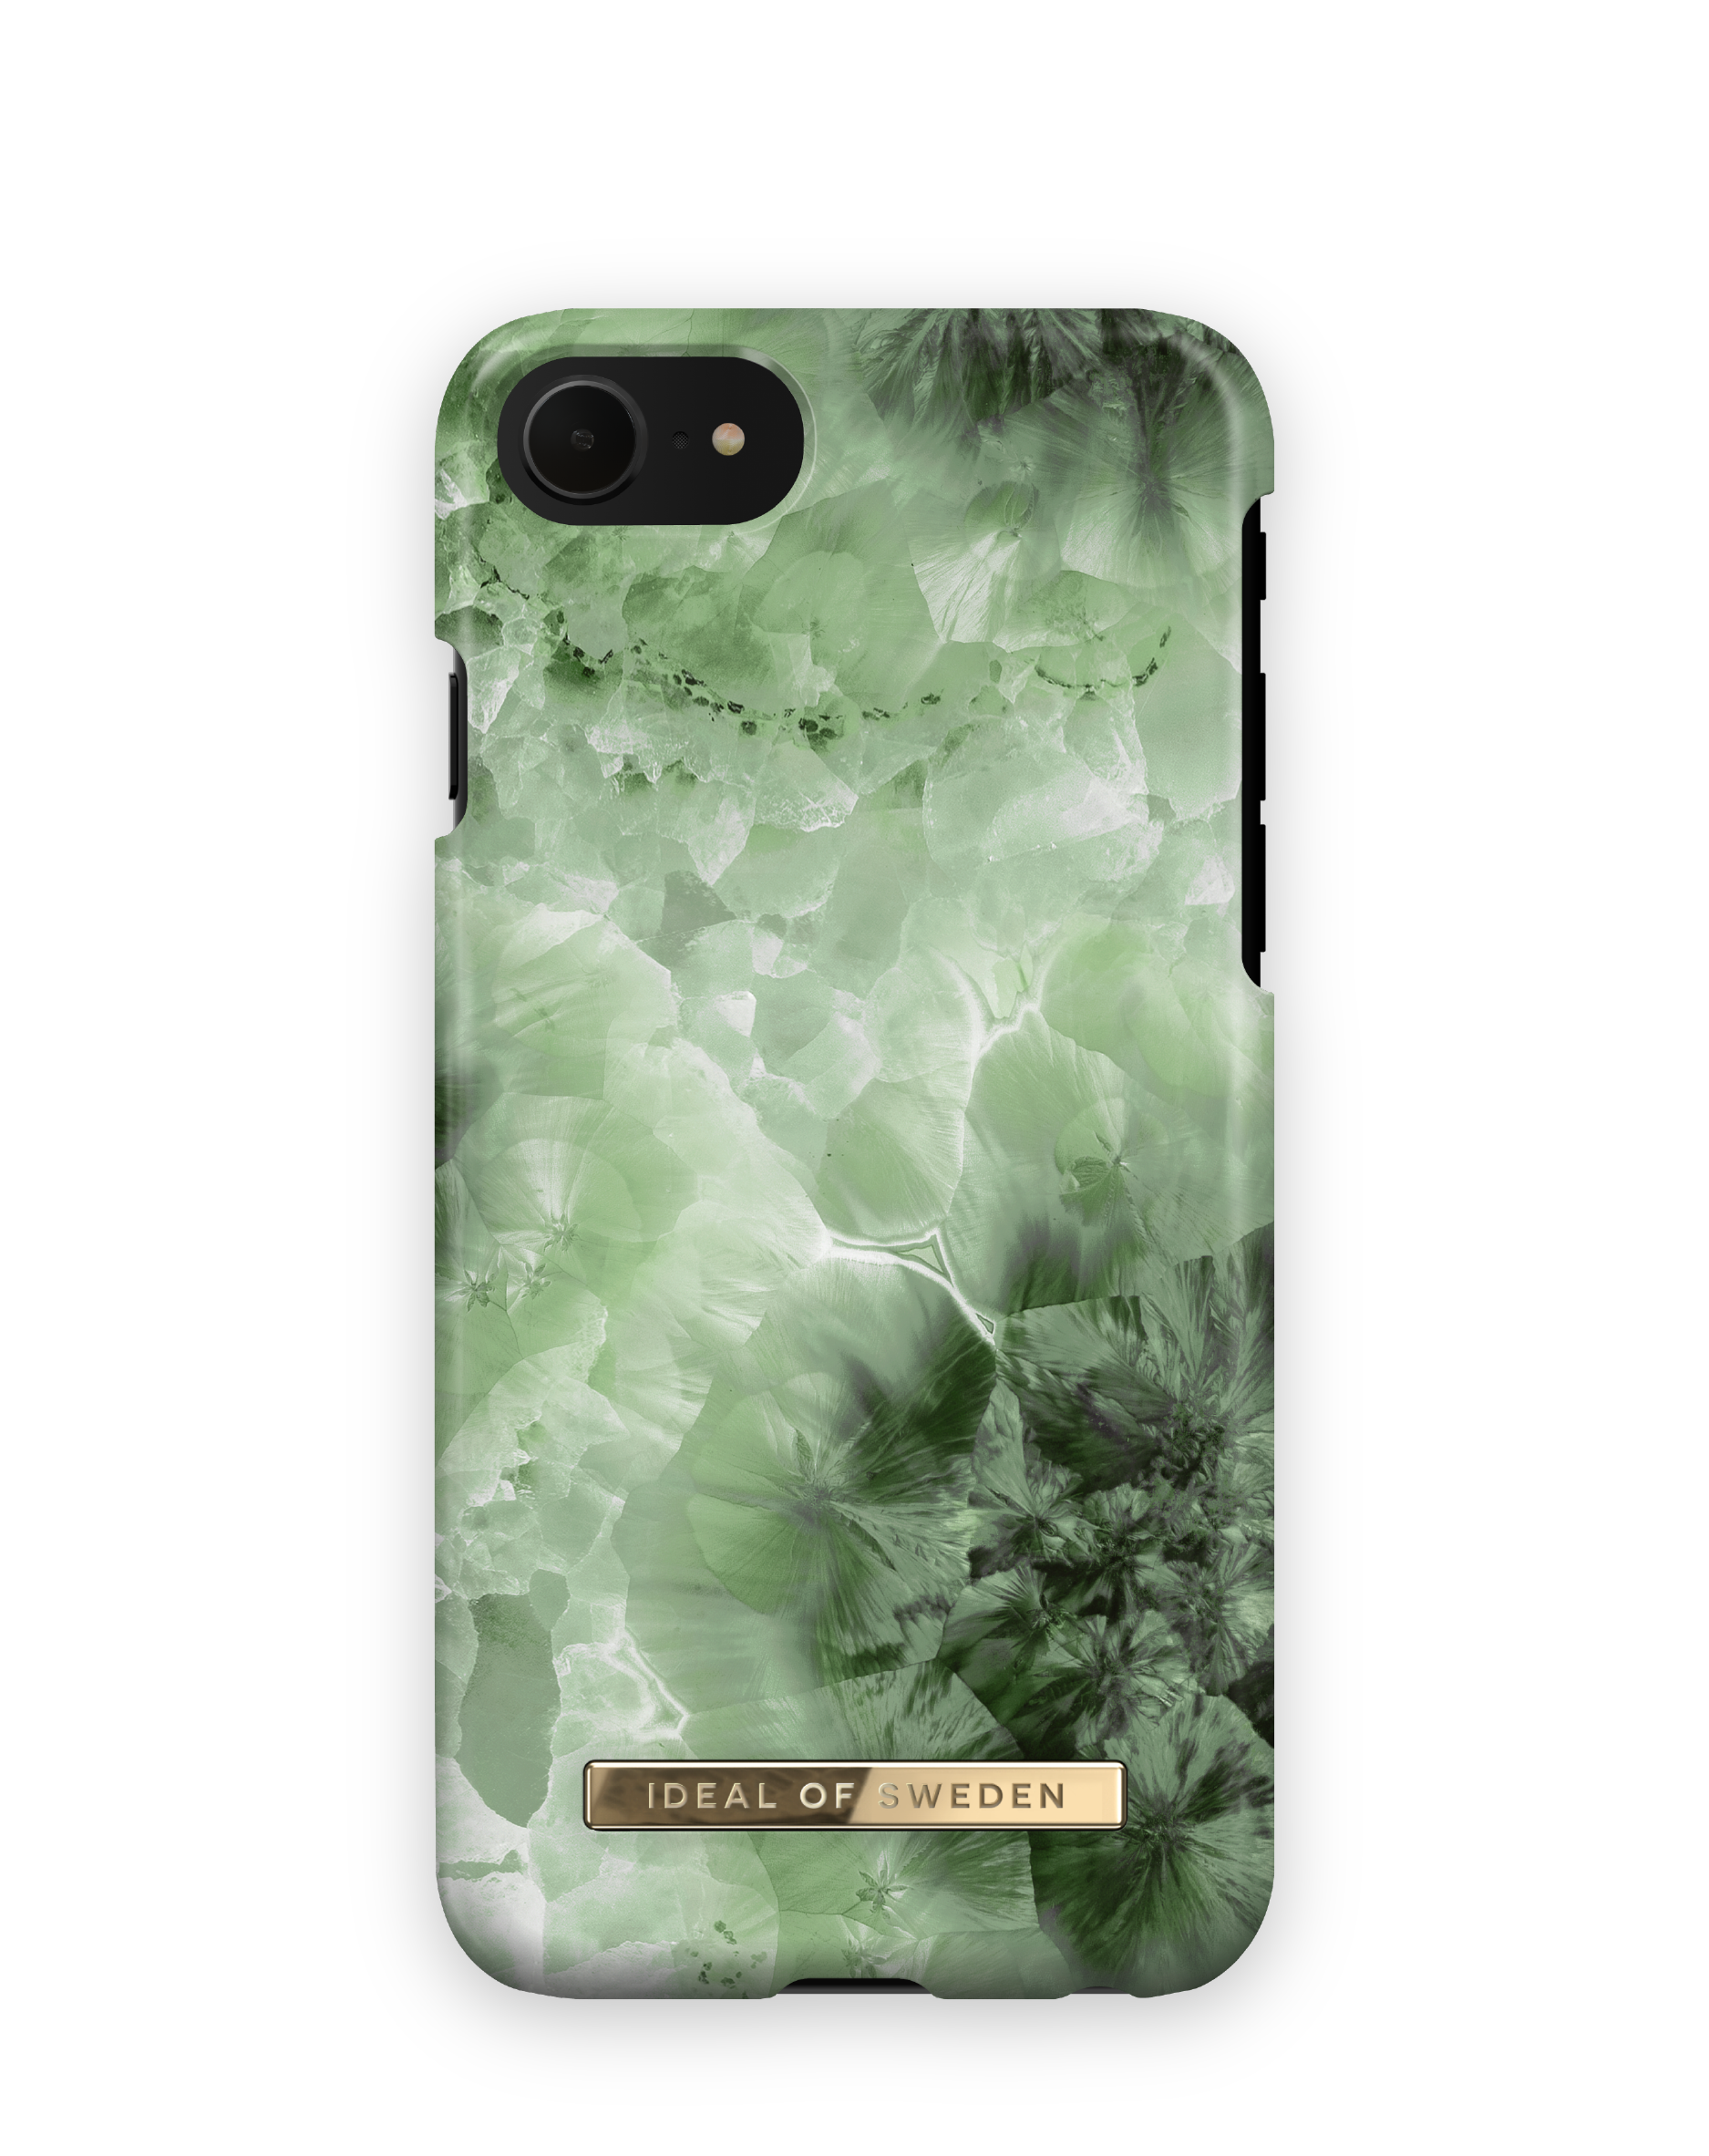 Apple OF SE Sky Apple iPhone IDEAL iPhone Green Apple Apple (2020), 6(S), Backcover, IDFCAW20-I7-230, iPhone Crystal SWEDEN 8, 7, Apple, iPhone